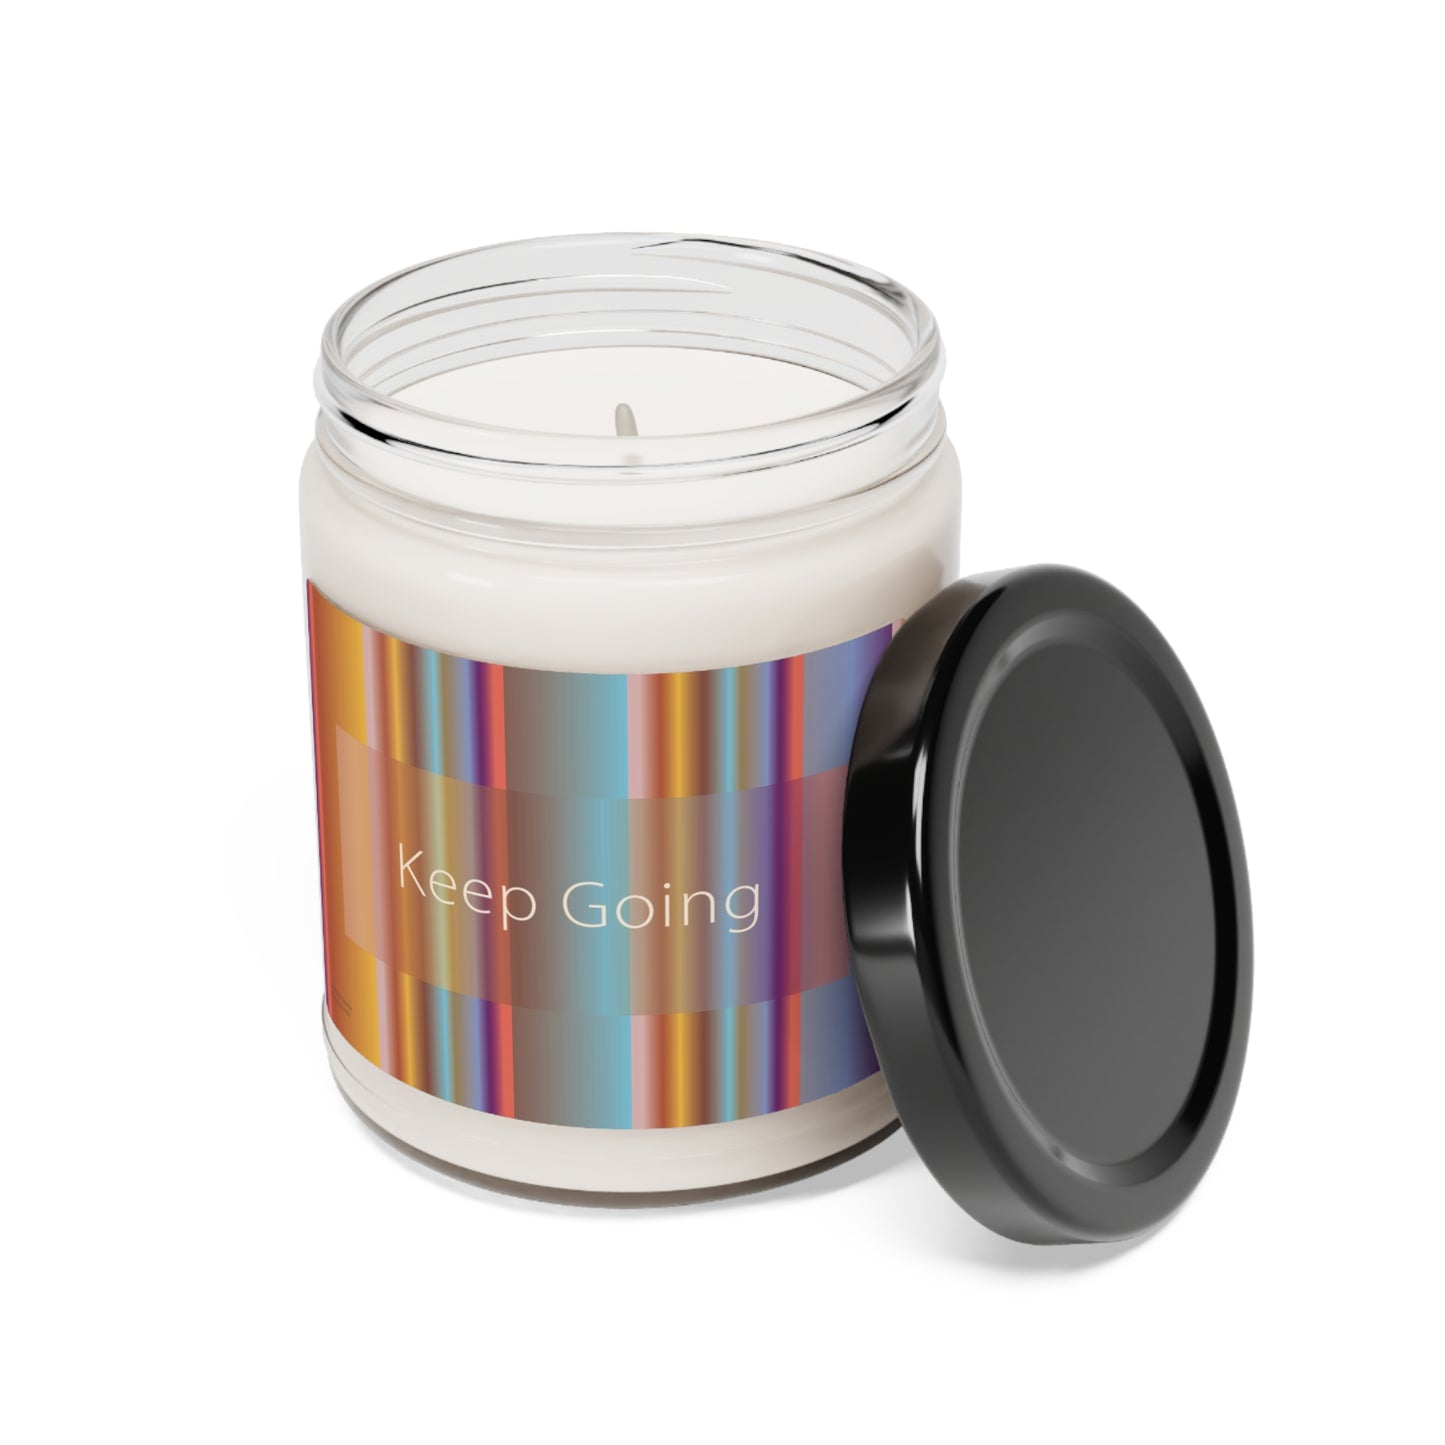 Scented Soy Candle, 9oz Keep Going - Design No.1801